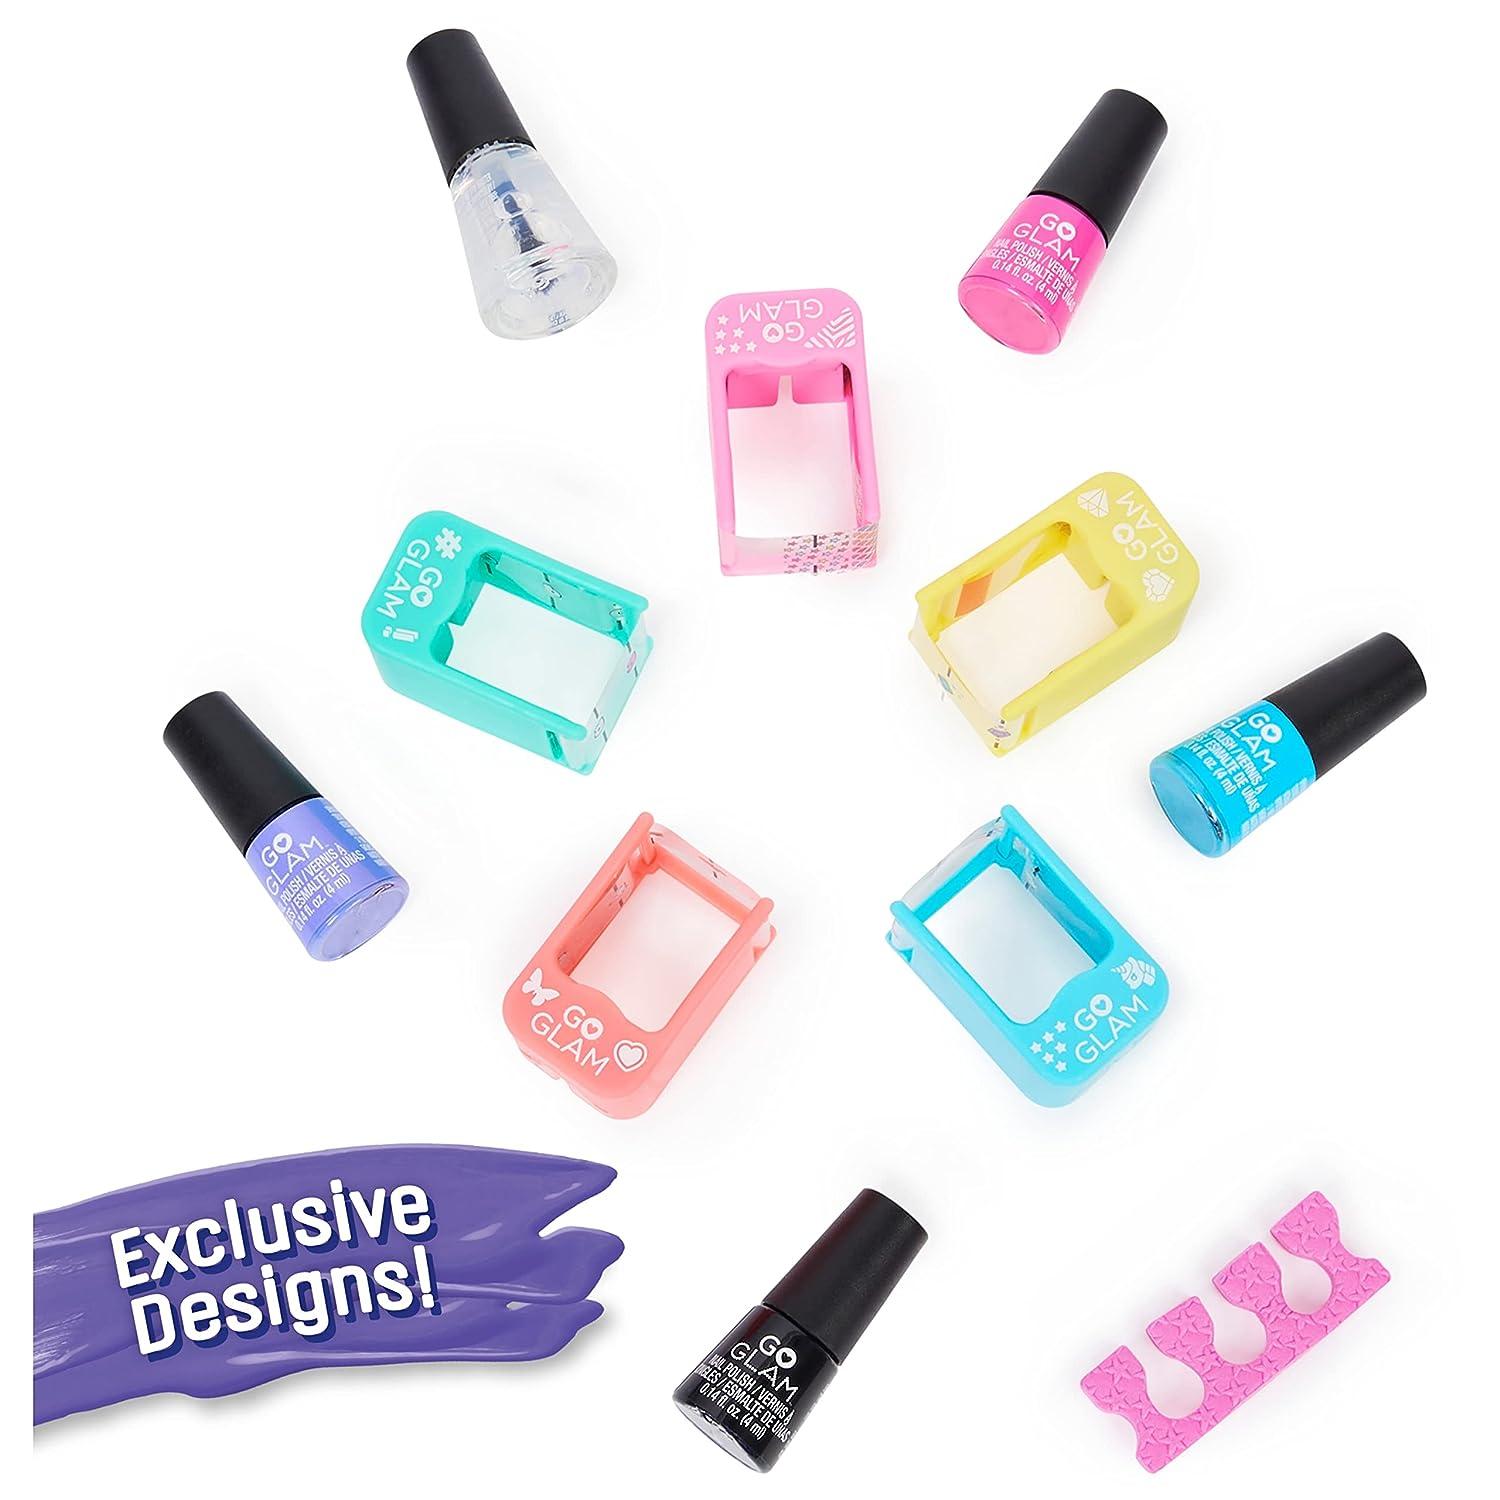 Cool Maker GO Glam Nail Salon for Manicures and Pedicures with 5 Patterns  and Nail Dryer